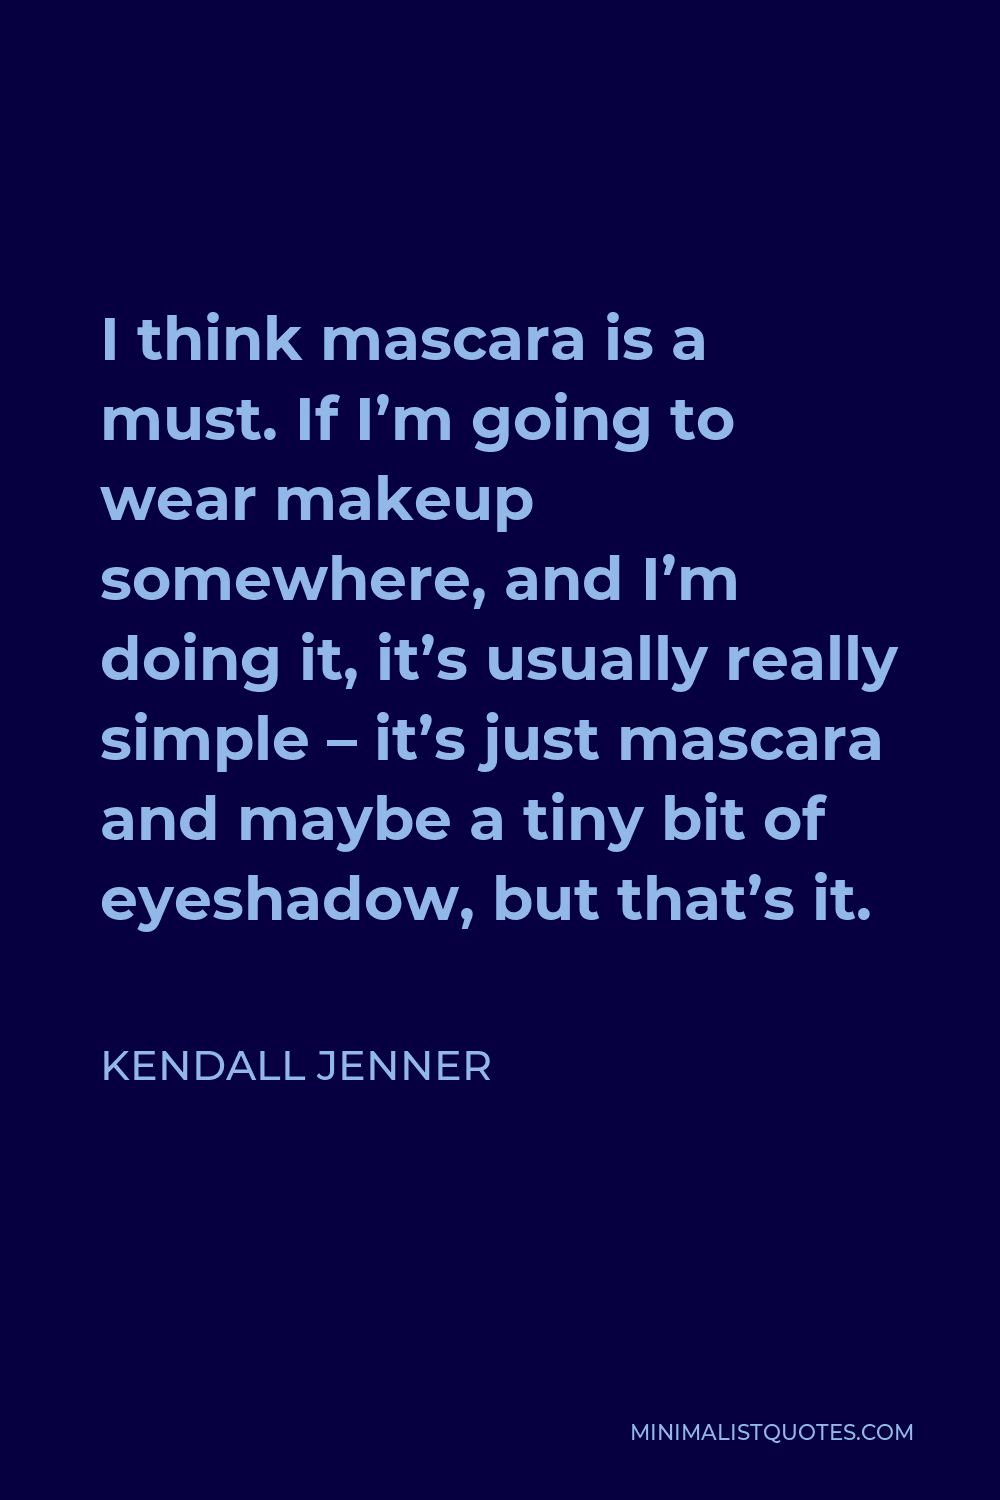 Kendall Jenner Quote - I think mascara is a must. If I’m going to wear makeup somewhere, and I’m doing it, it’s usually really simple – it’s just mascara and maybe a tiny bit of eyeshadow, but that’s it.